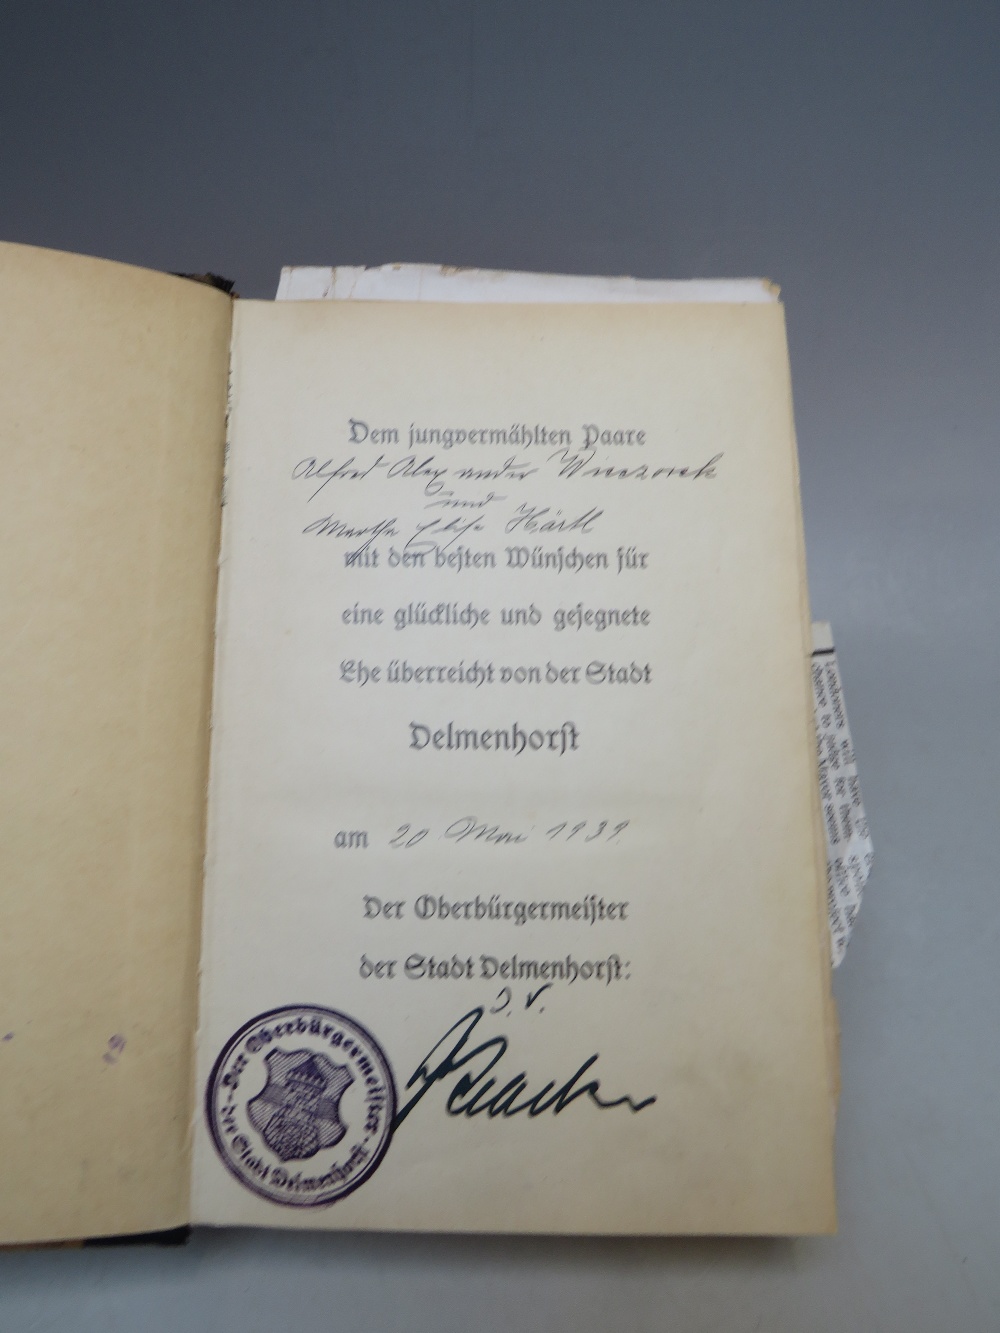 ADOLF HITLER "MEIN KAMPF" GERMAN EDITION DATED 1938, with later signature - Image 2 of 7